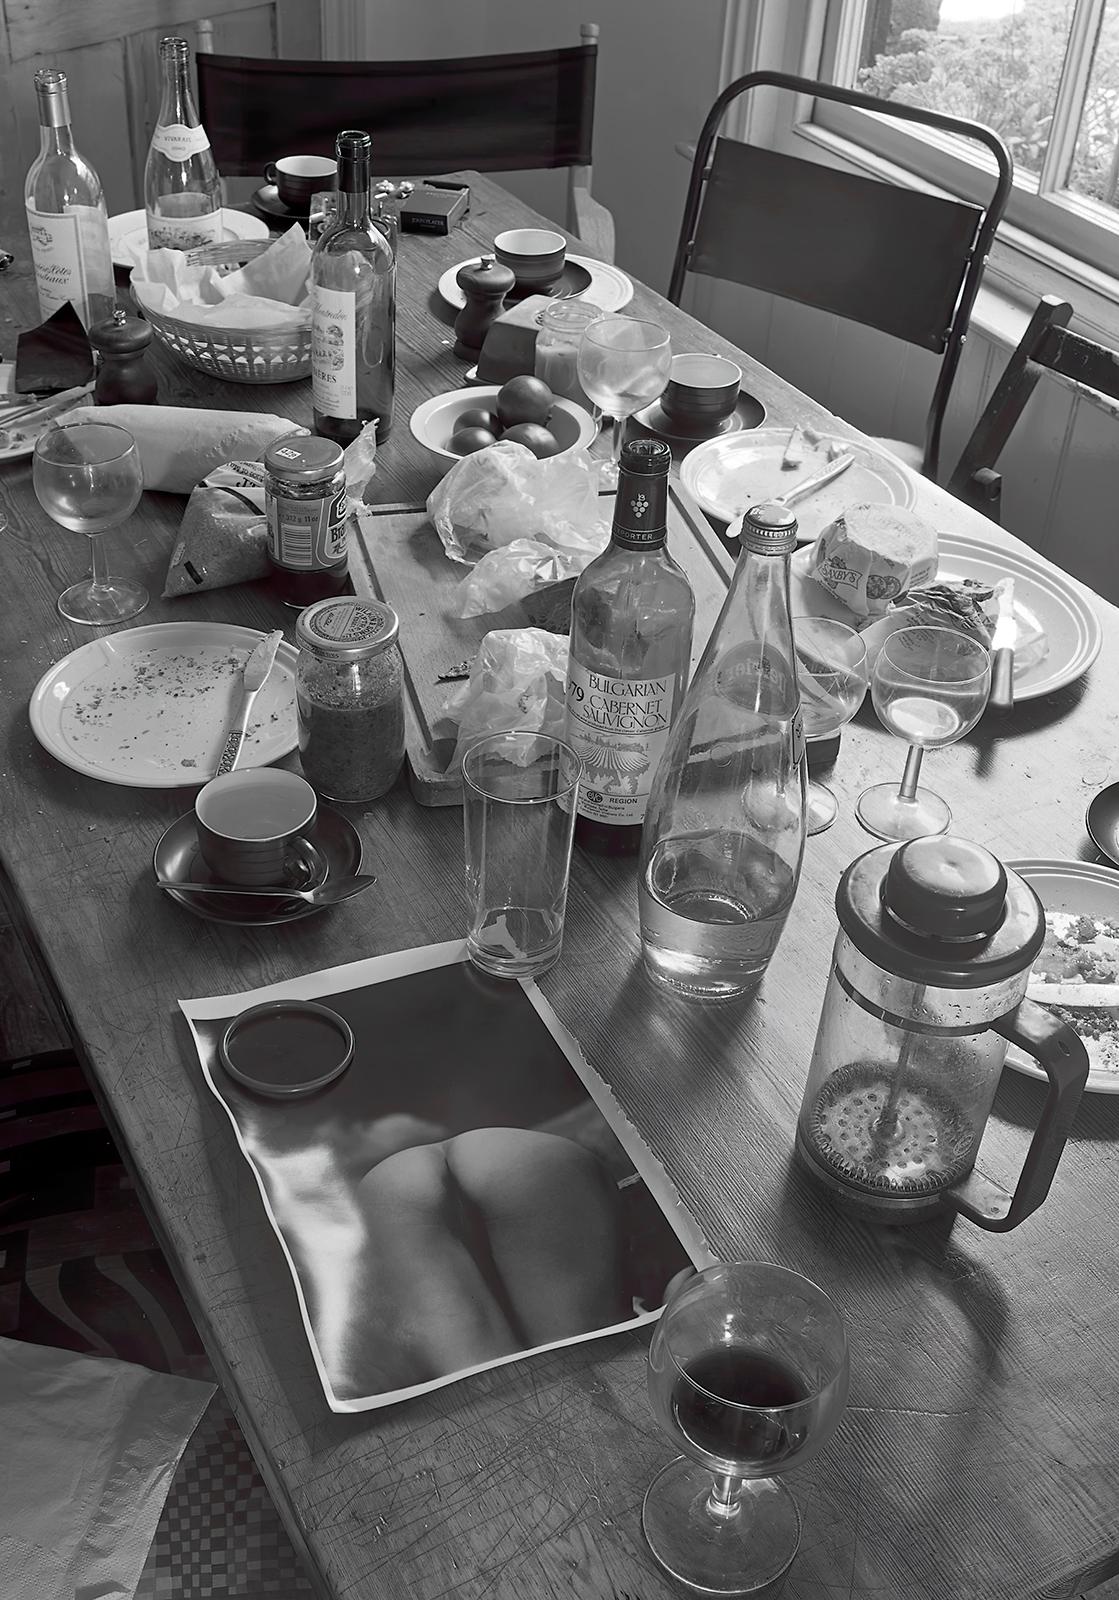 Table Top - Signed limited edition still life print, Black white, Contemporary  - Photograph by Ian Sanderson